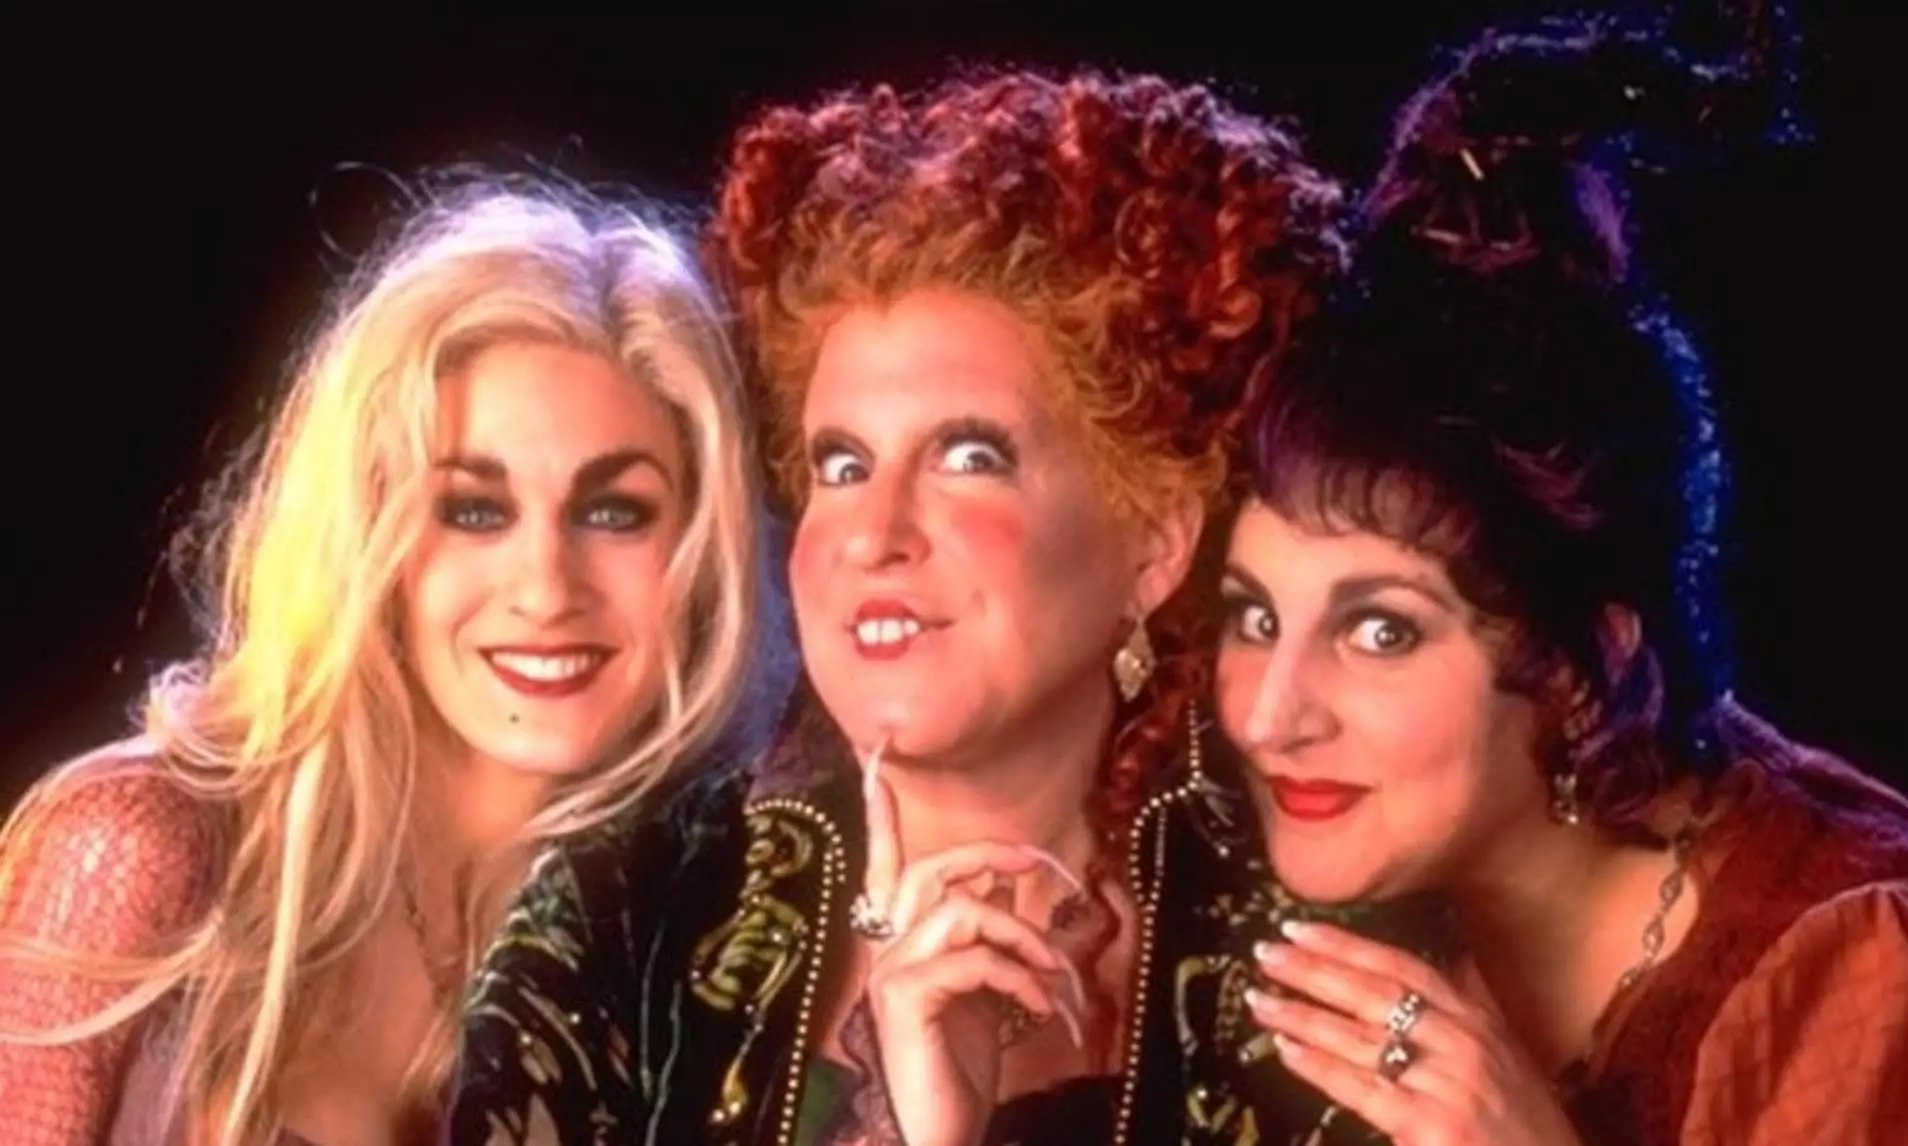 The Sanderson sisters will return in the highly anticipated sequel (